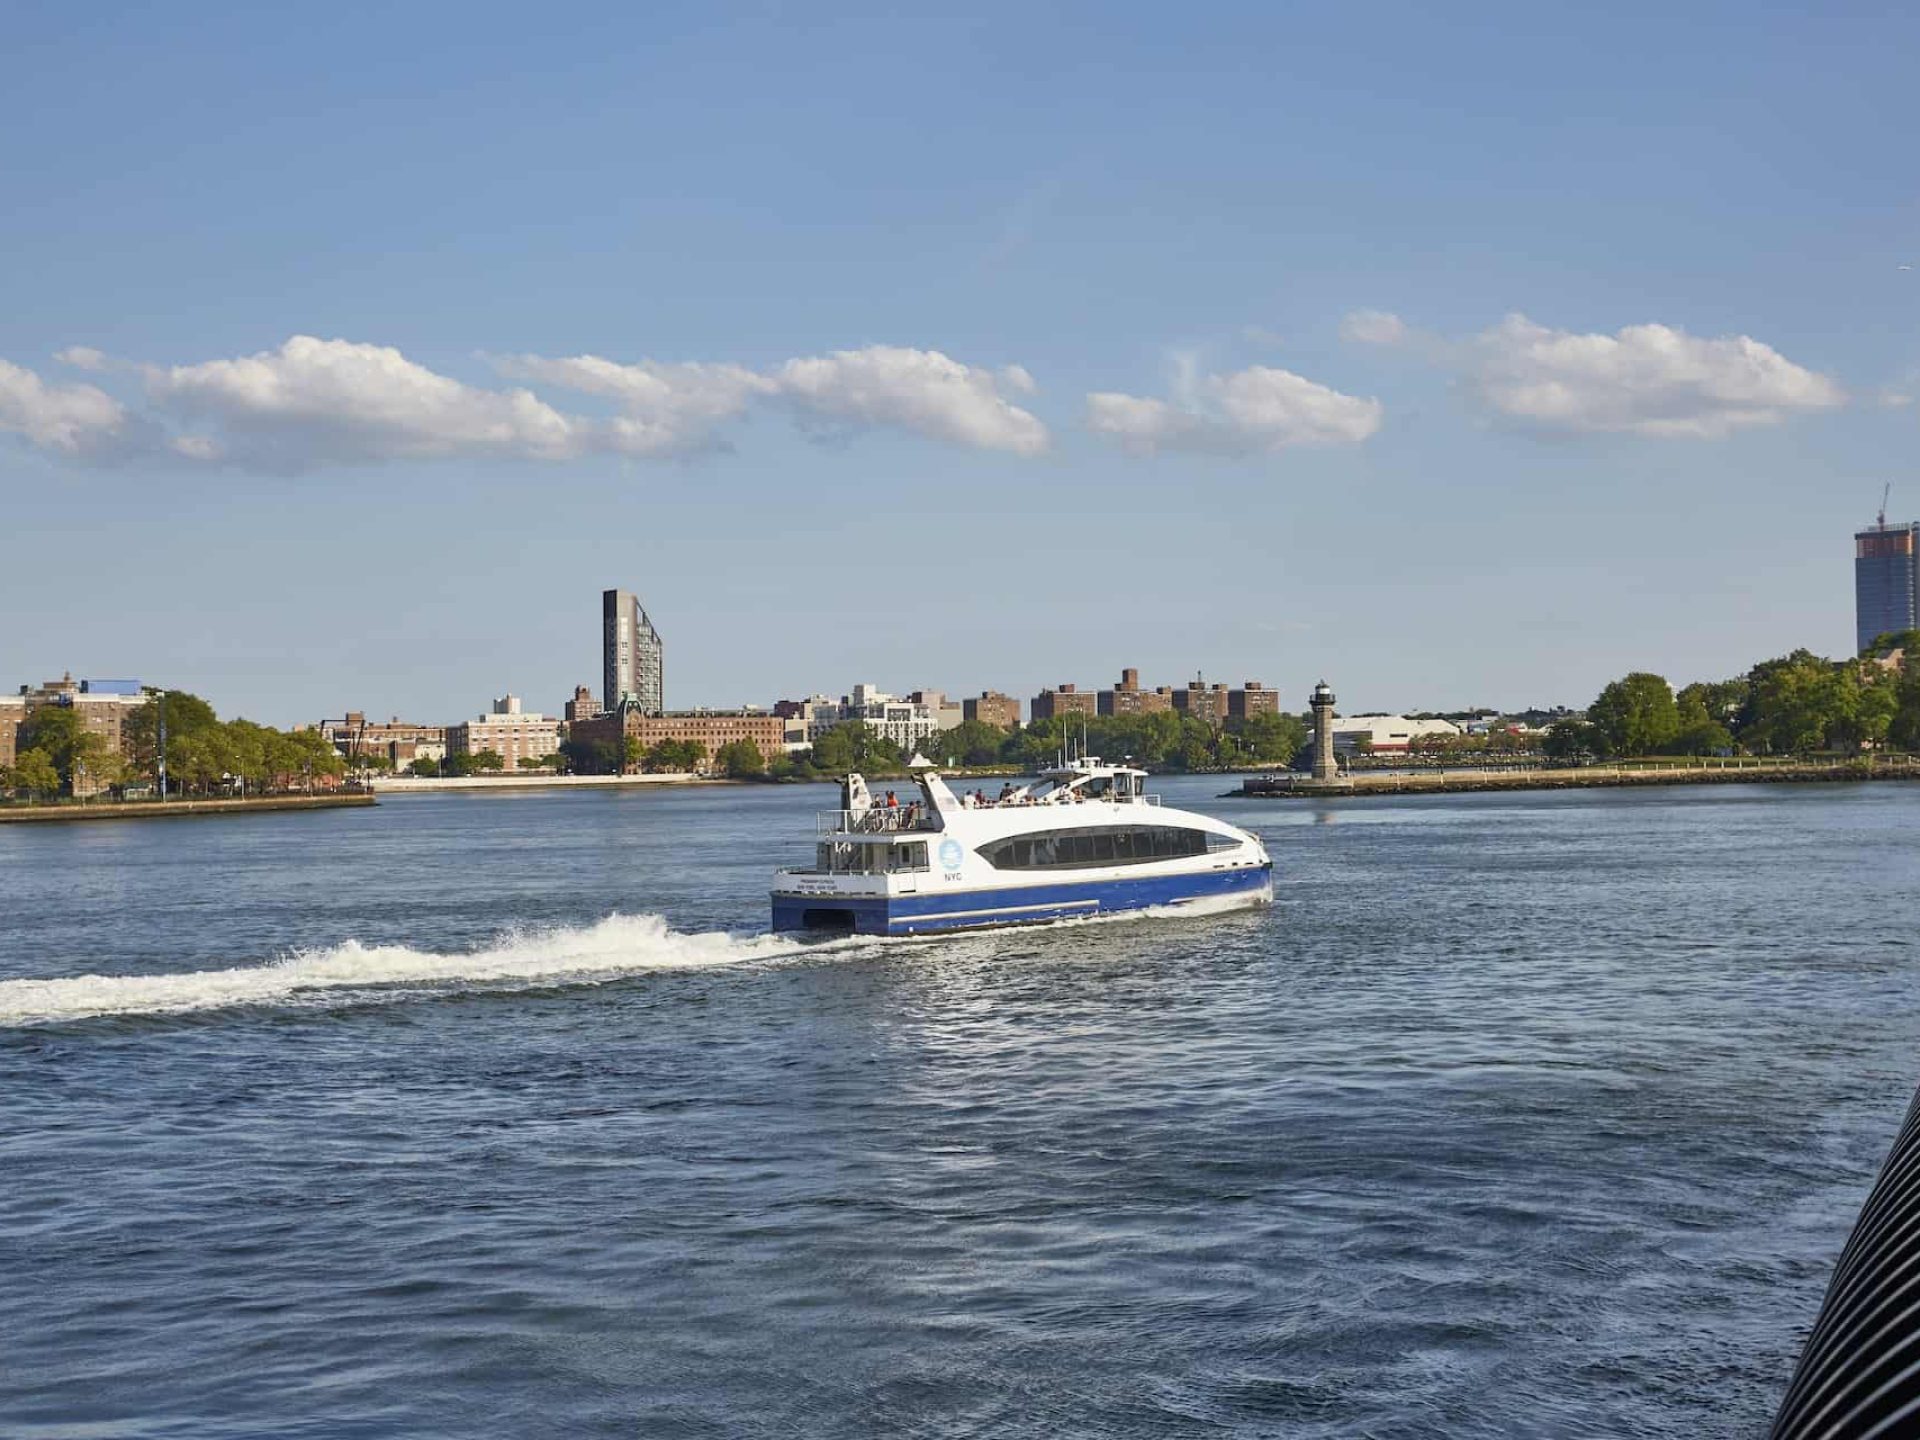 New York City ferry on the East River. White and blue ferry boat with passengers and city buildings in the background.